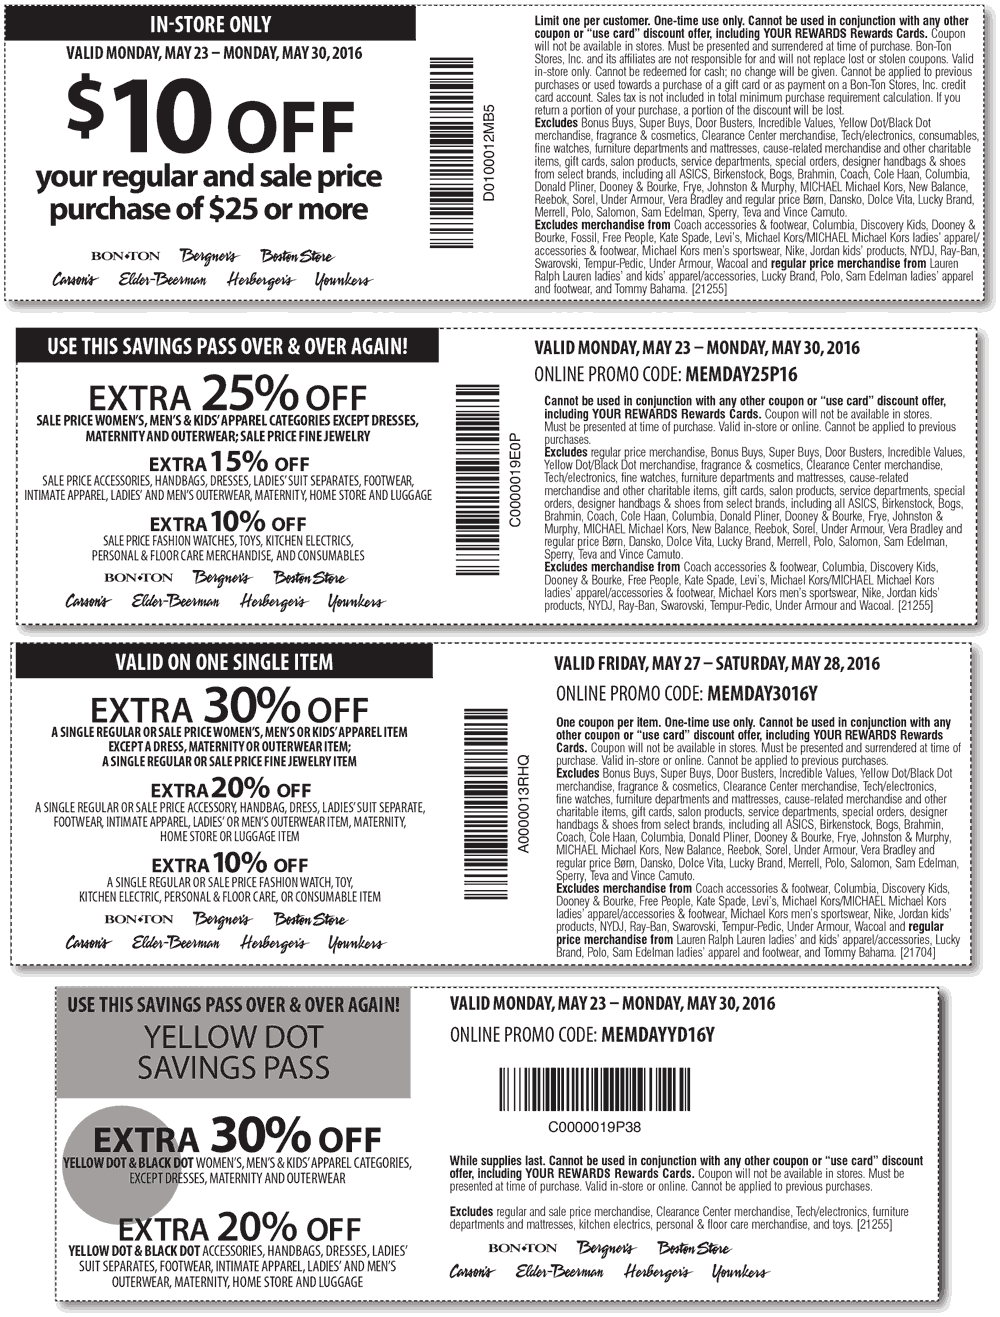 Carsons Coupon April 2024 $10 off $25 & more at Carsons, Bon Ton & sister stores, or 25% online via promo code MEMDAY25P16